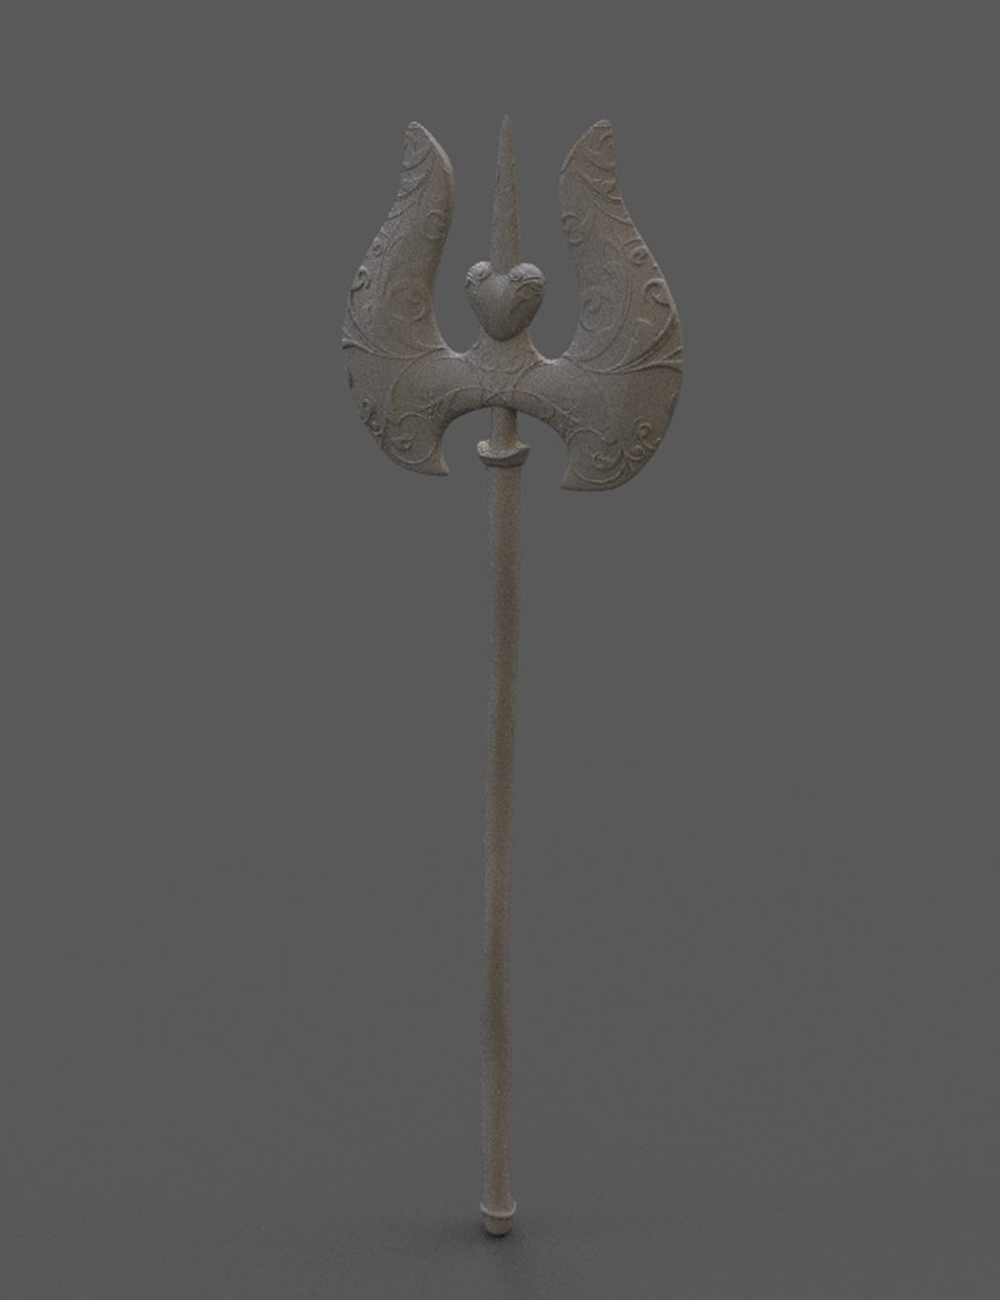 My 3D Weapon model before adding color. It's drab.